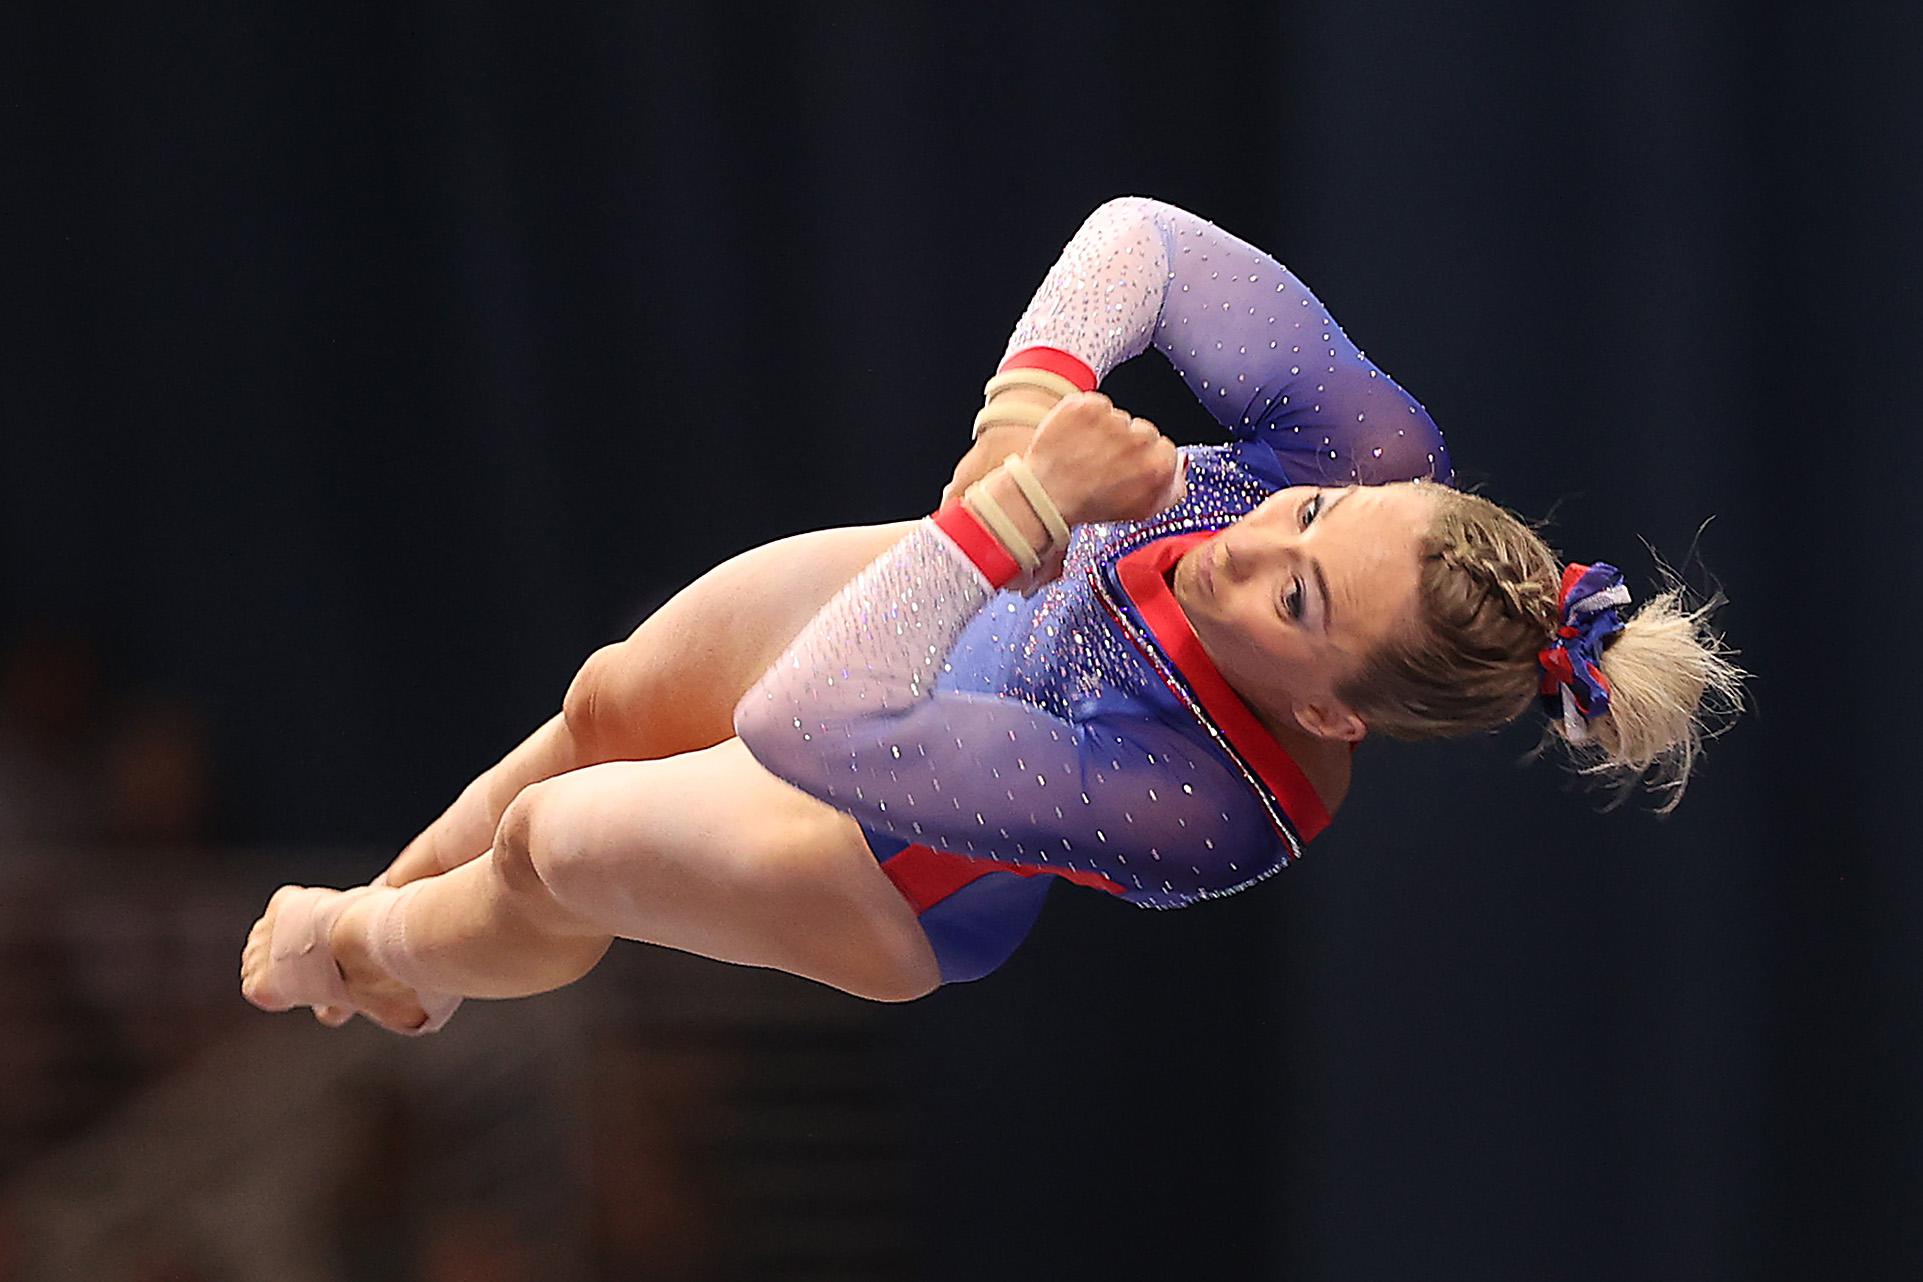 MyKayla Skinner flipping horizontally through the air, her legs and arms tucked tightly together, in a line with her torso